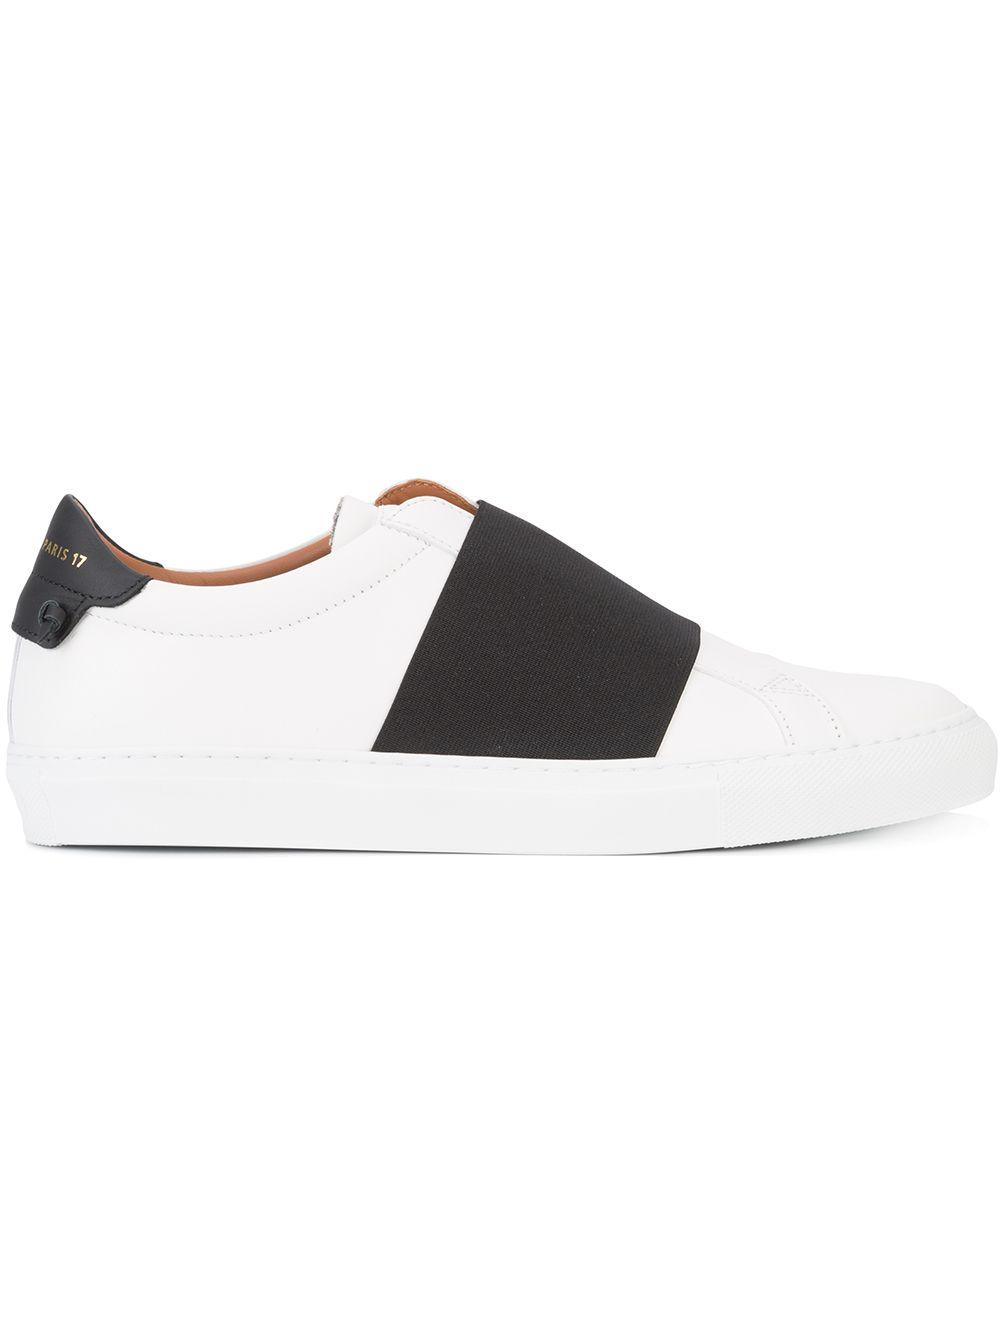 Givenchy Leather Elastic Skate Sneakers in White | Lyst